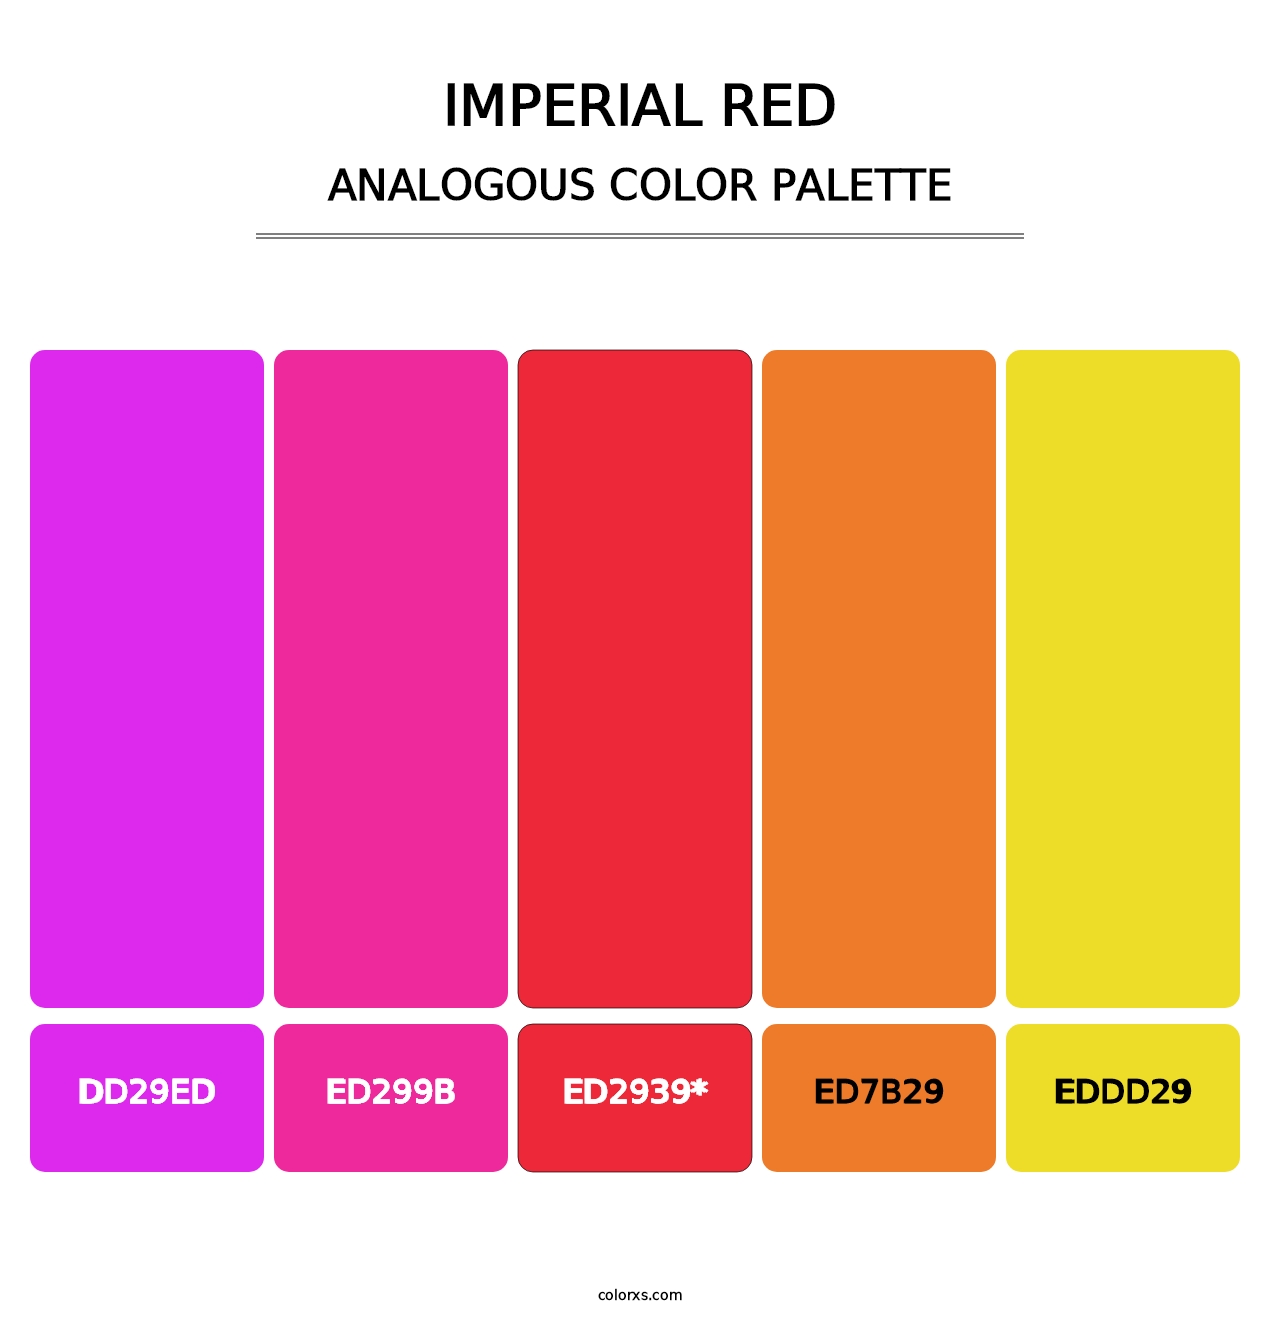 Imperial Red - Analogous Color Palette